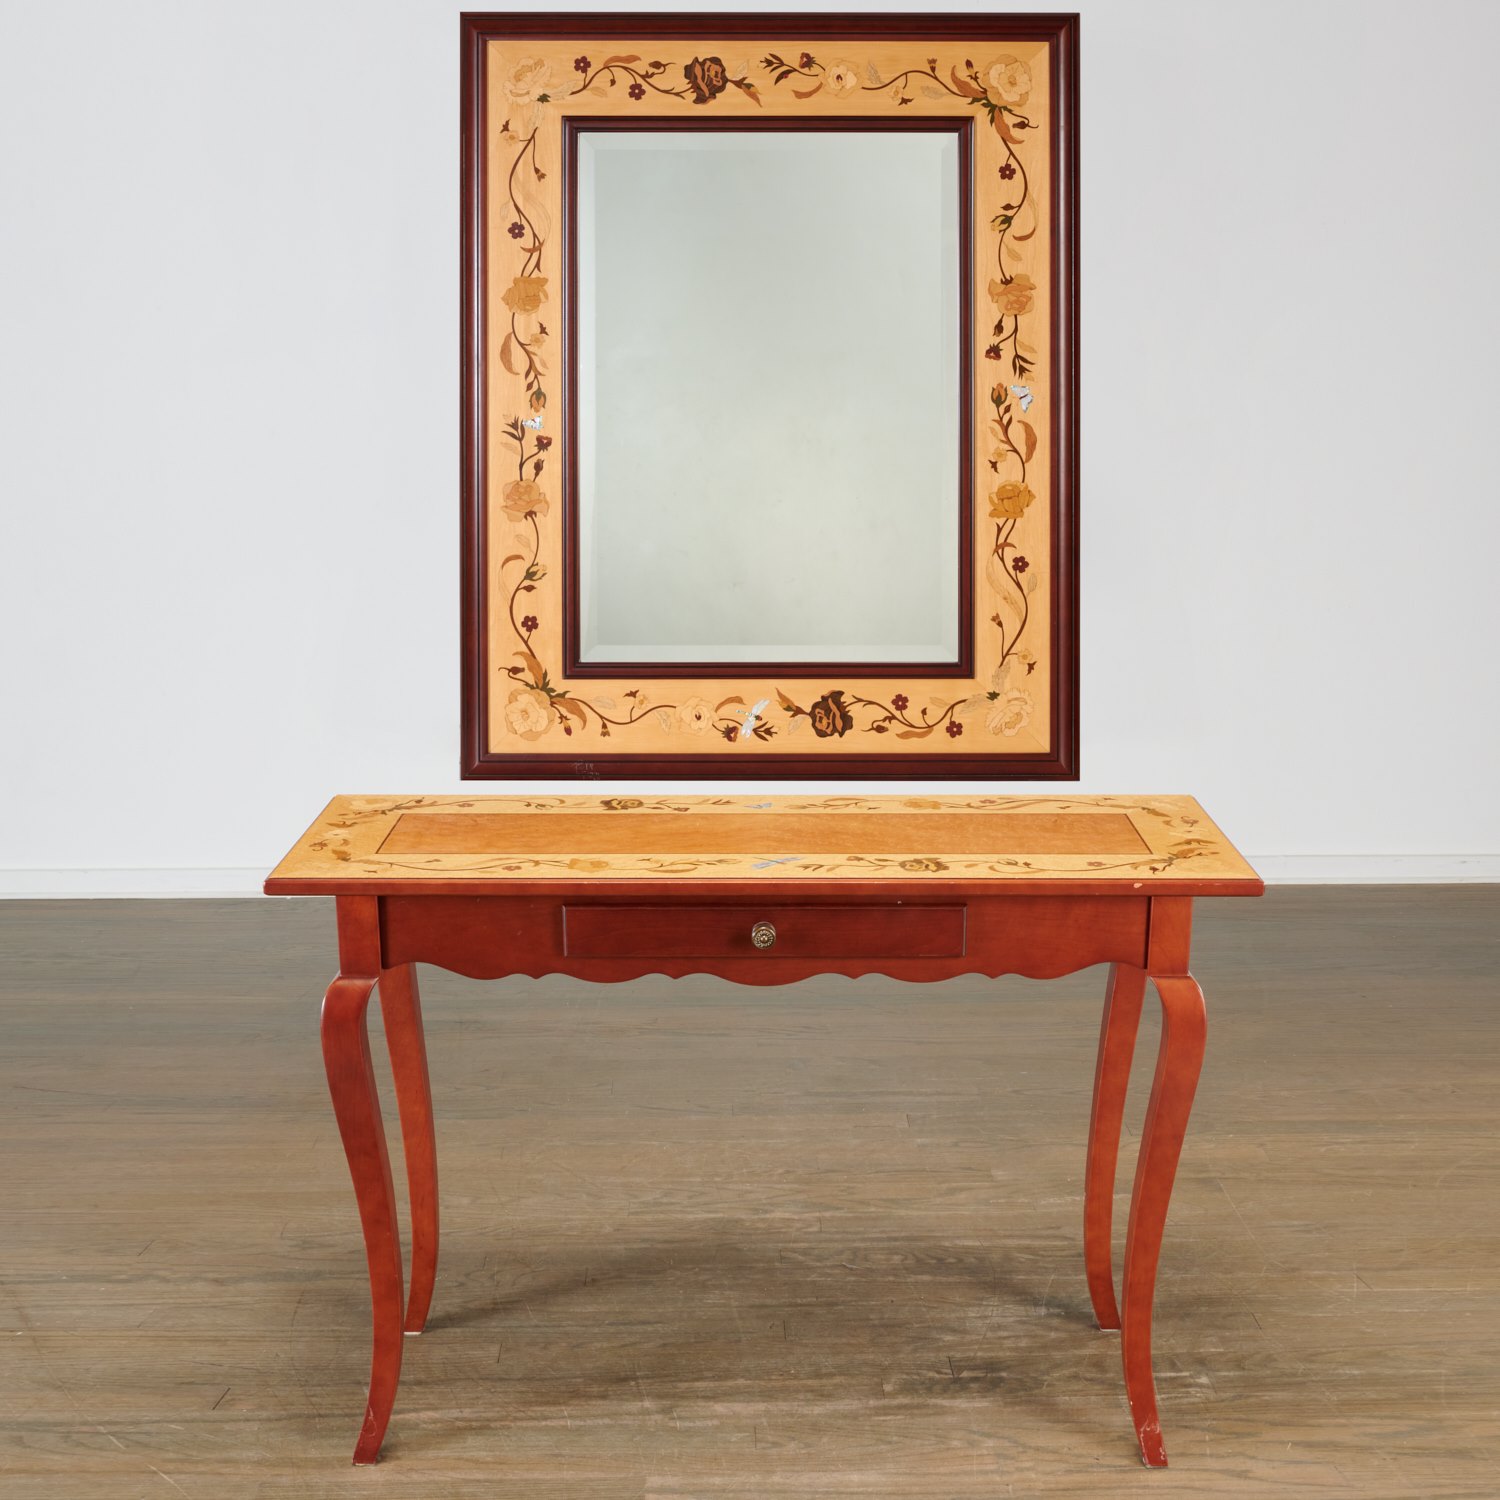 EMILE GALLE STYLE WOOD INLAID CONSOLE MIRROR 361d11